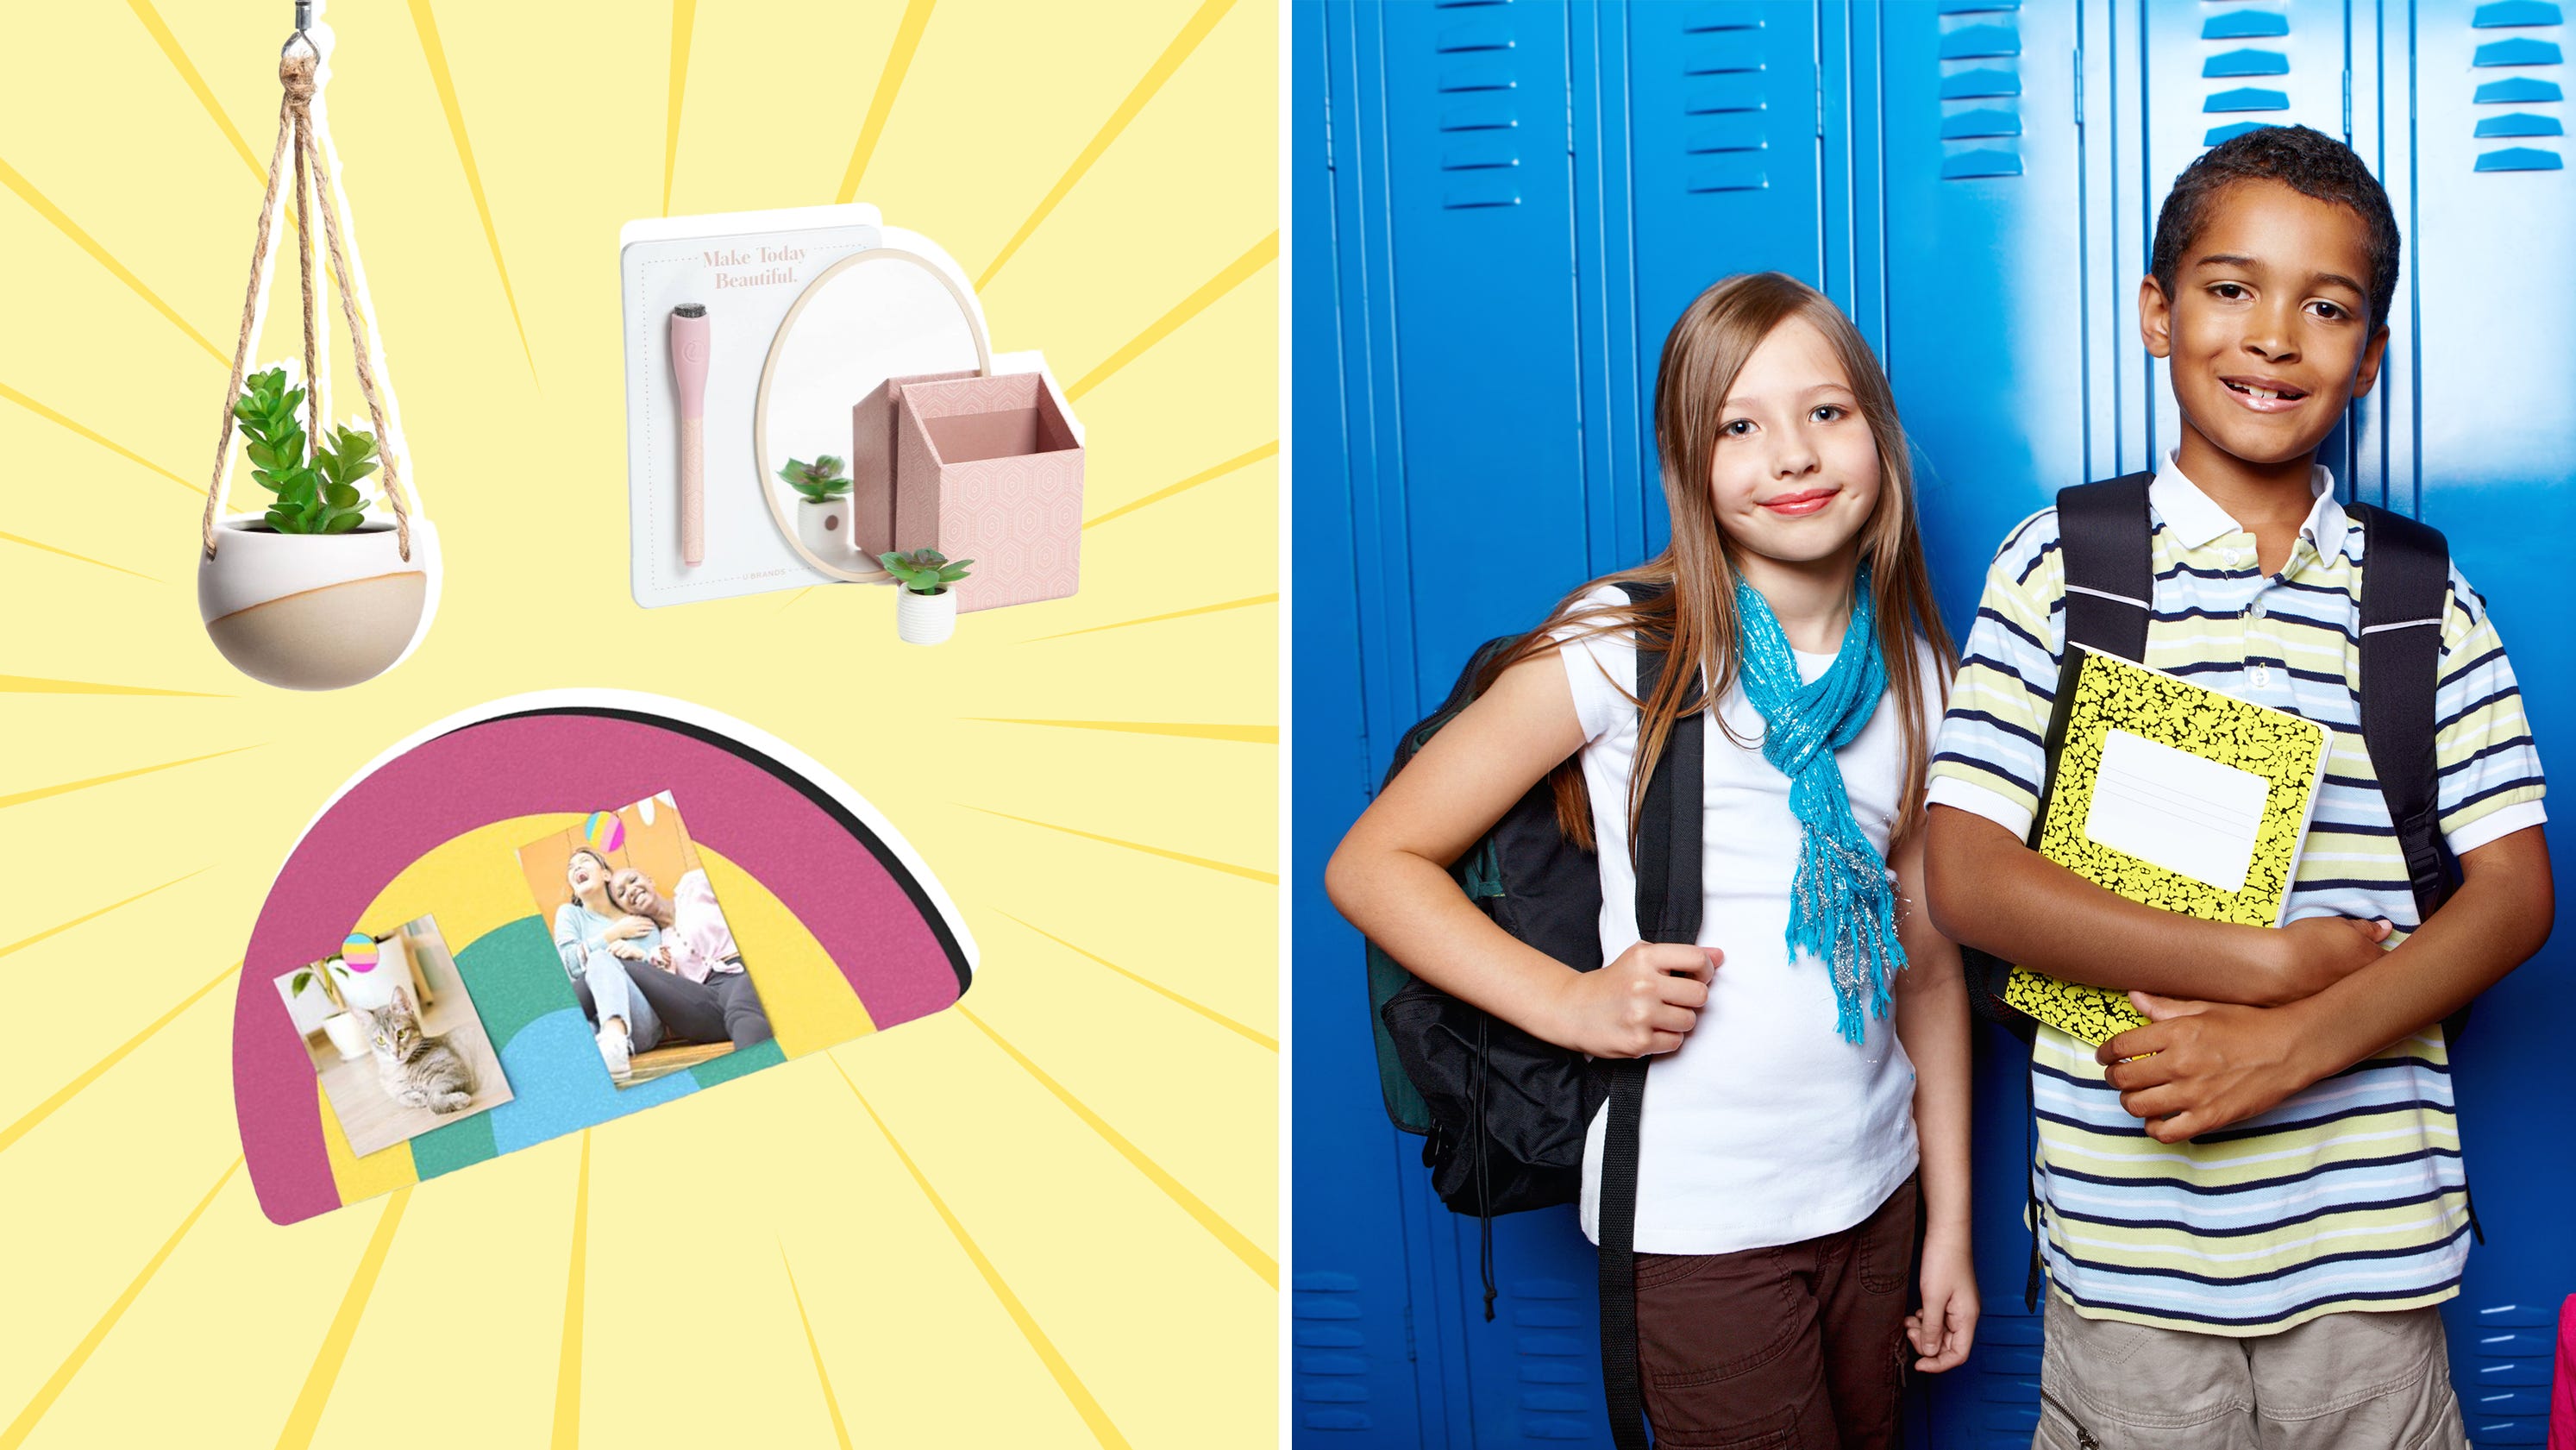 35 locker decorations to shop for teens at Target, Amazon and PBTeen